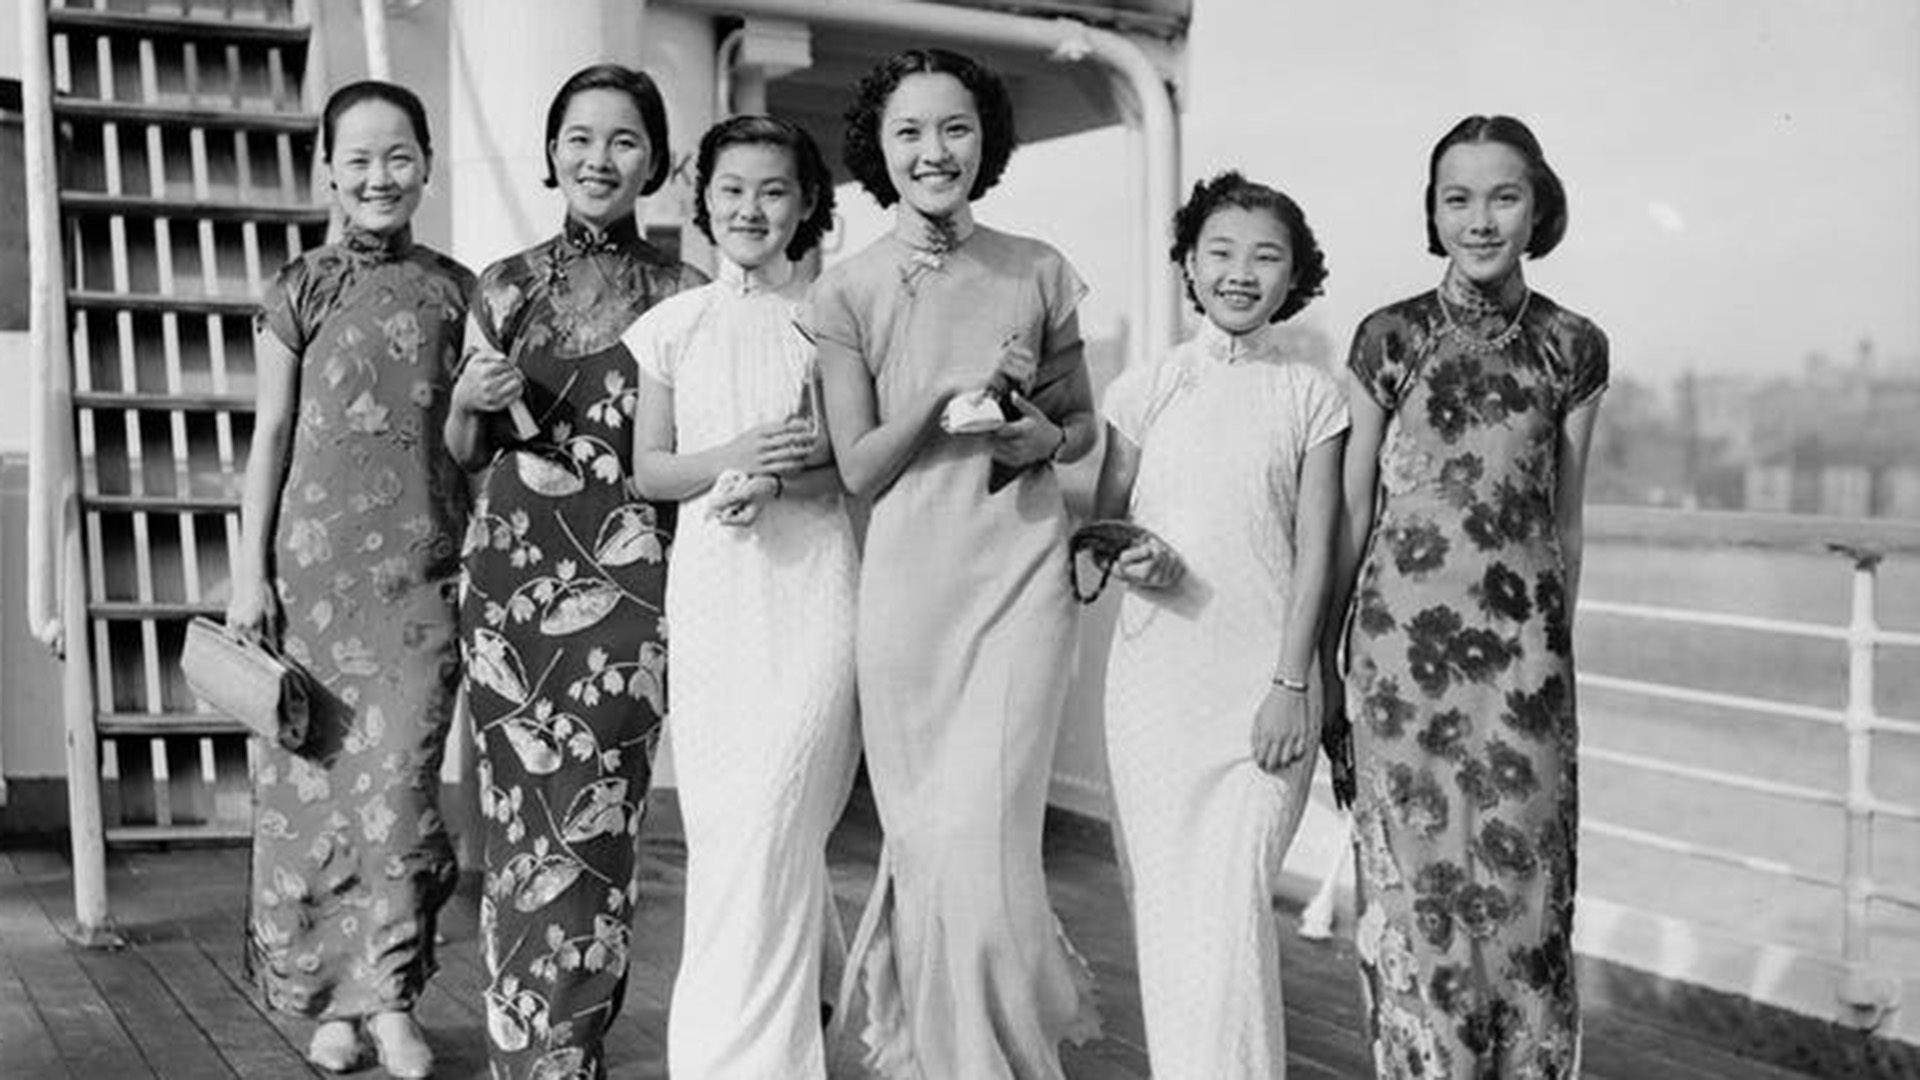 Converstion article: 'Your government makes us go': the hidden history of Chinese Australian women at a time of anti-Asian immigration laws